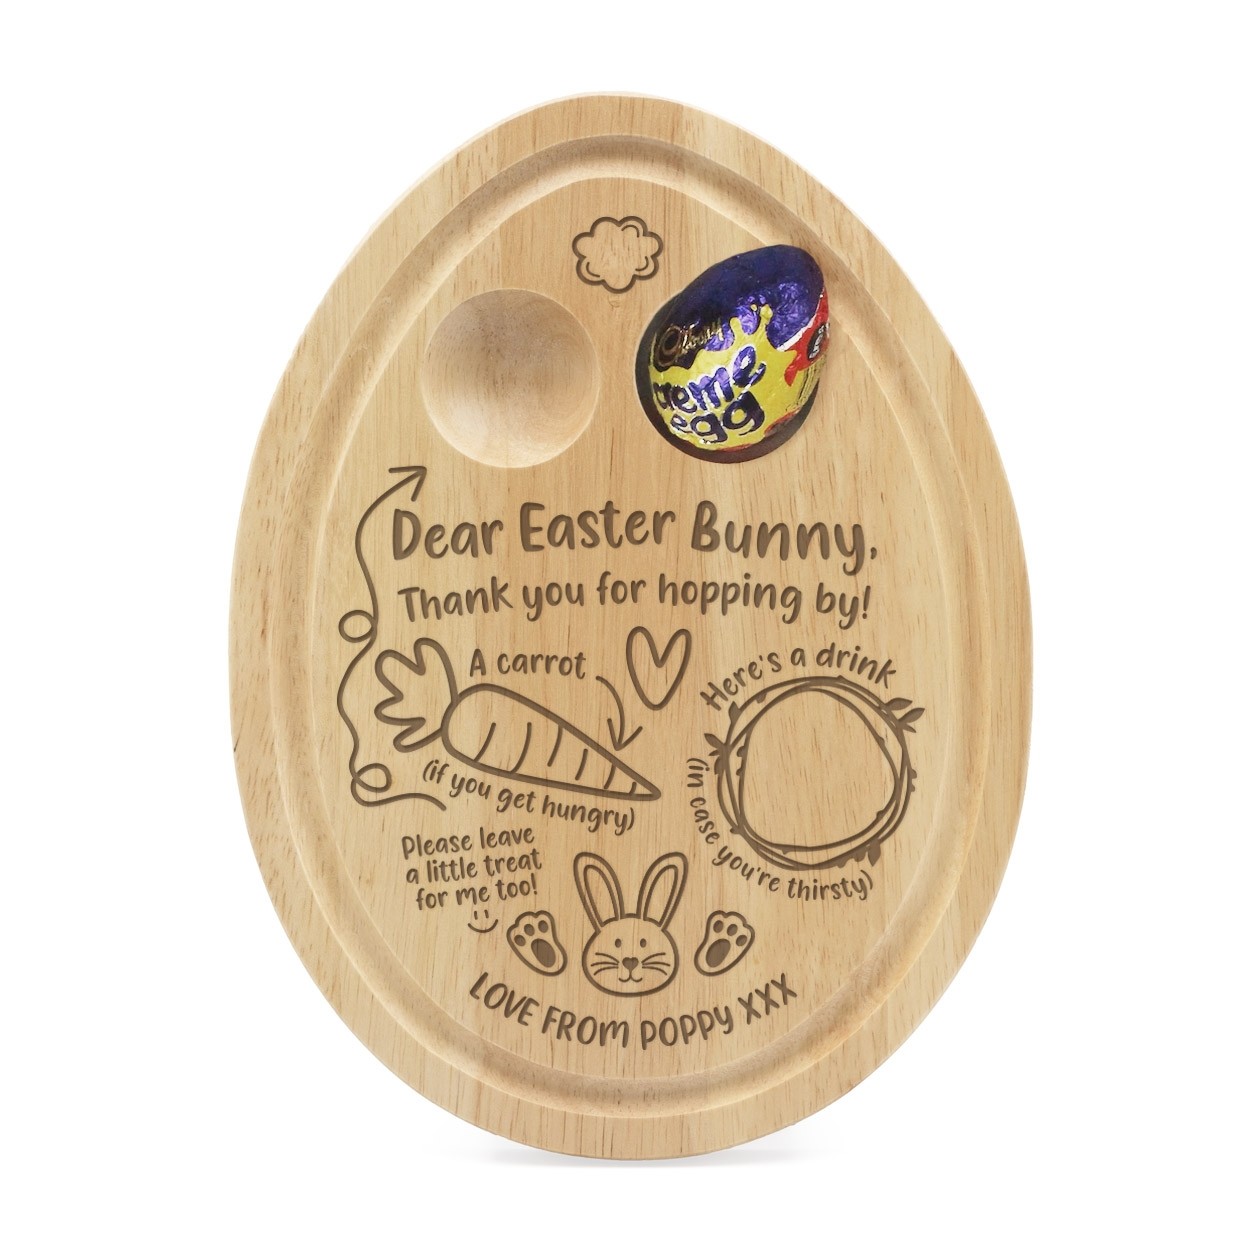 Personalised Easter Bunny Egg Board Breakfast Dippy Egg Cup - Thank You for Hopping By Drink, Carrot & Treat For Kids